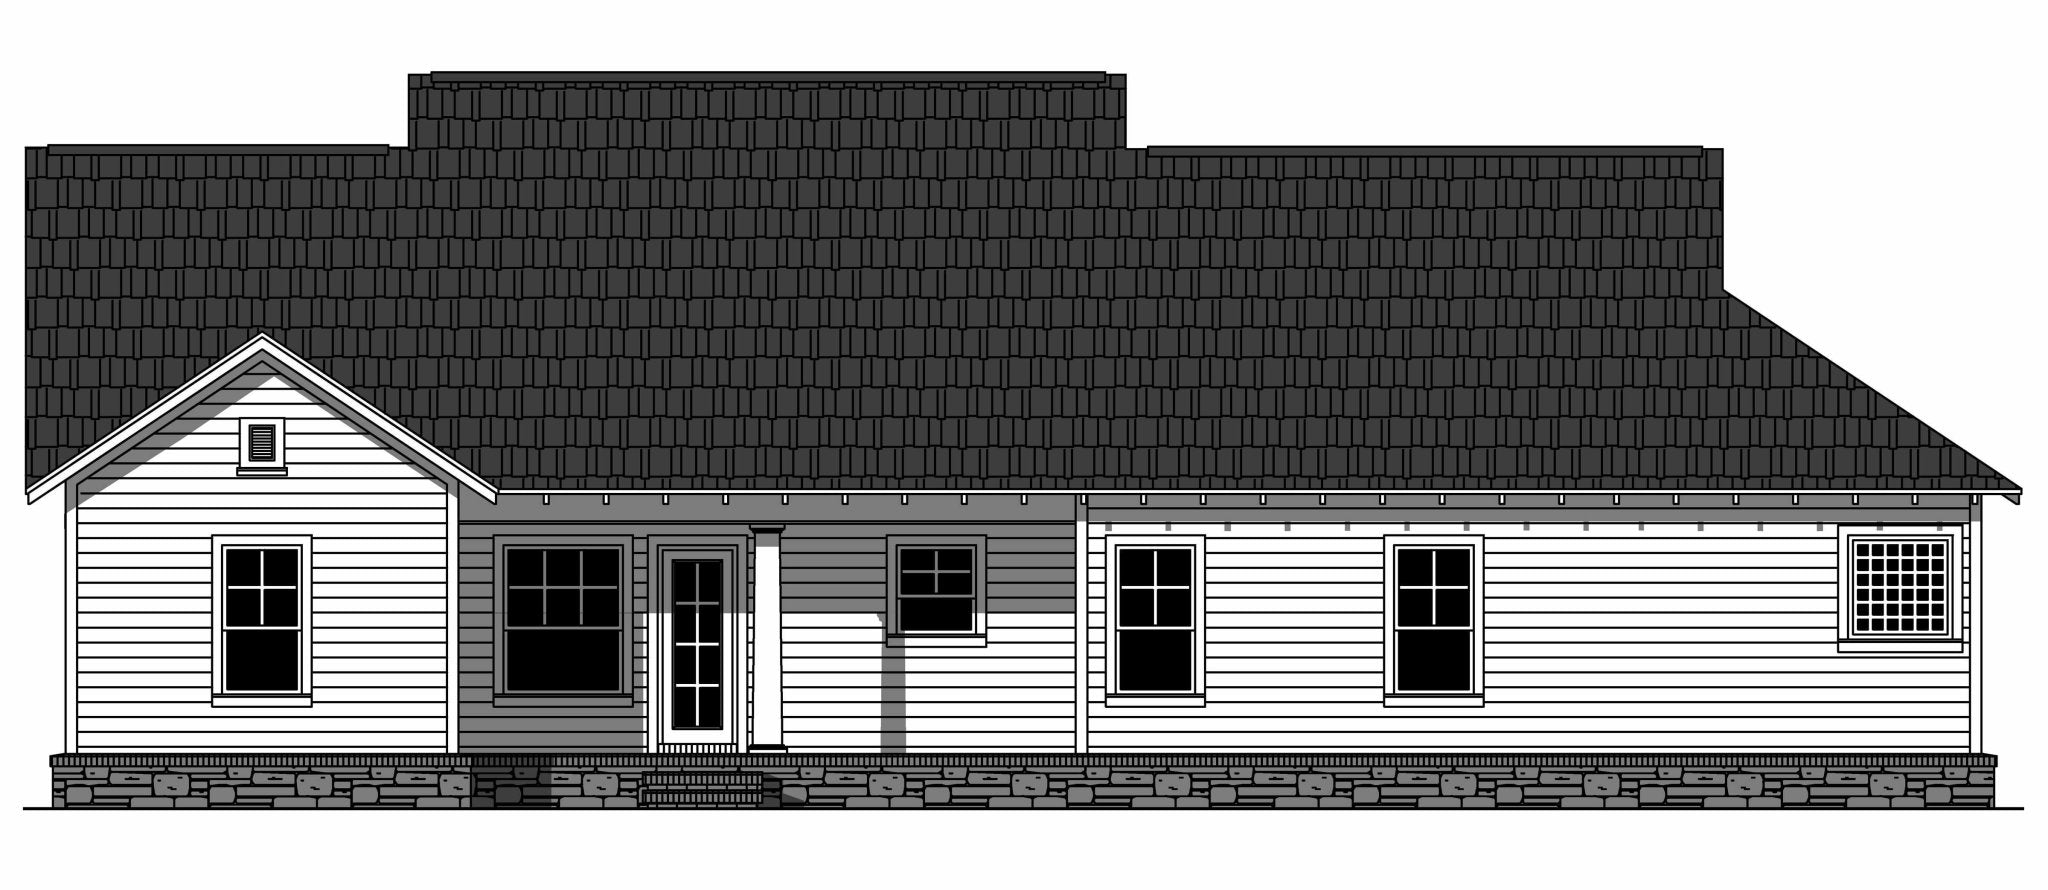 HPG-1876B-1: Paxton Road - House Plan Gallery